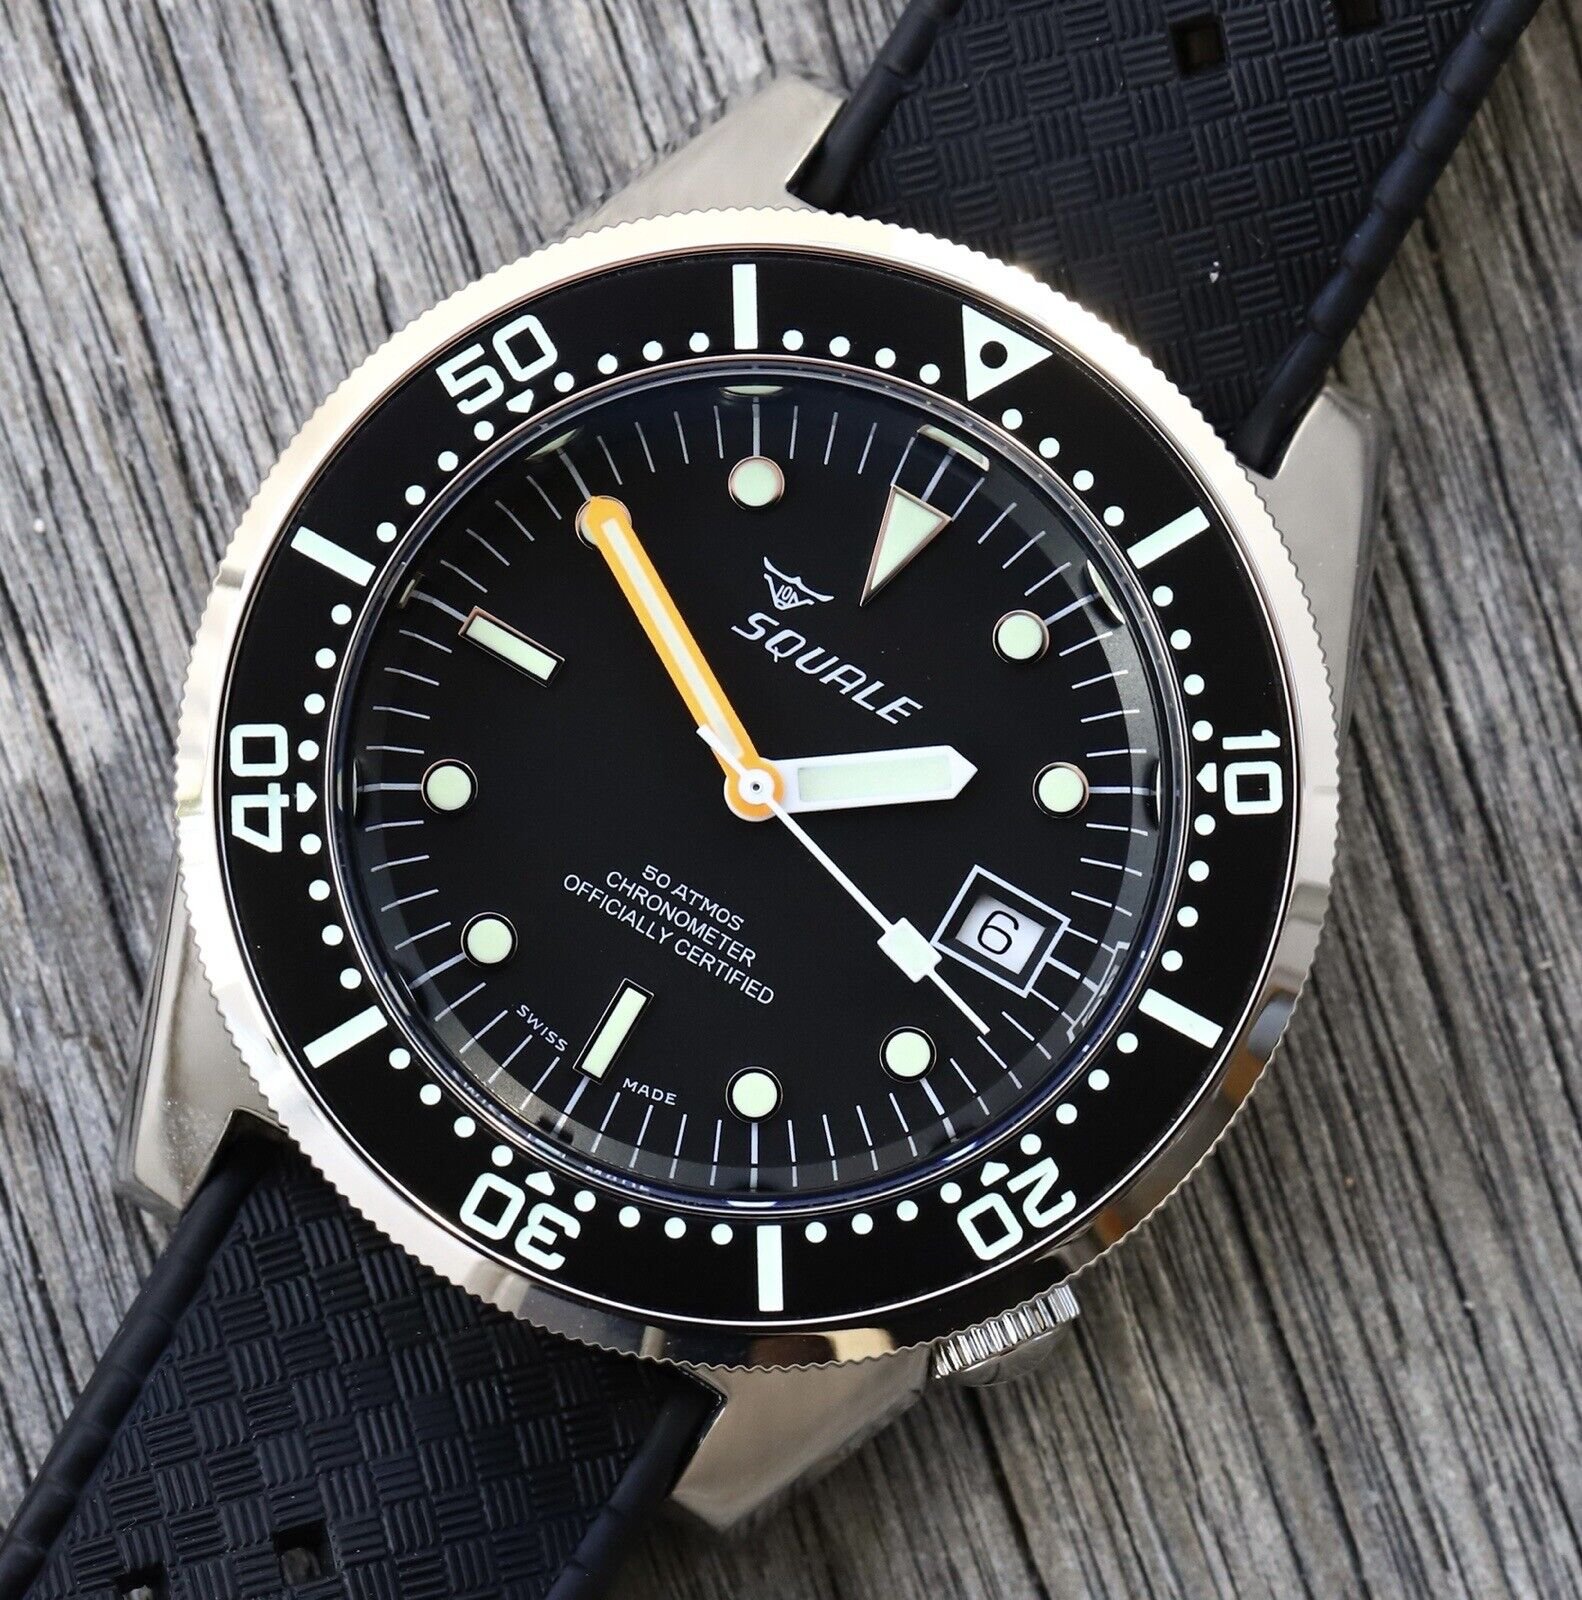 Squale 1521 Classic COSC Certified Chronometer 1521COSC - 2022 — WATCH VAULT